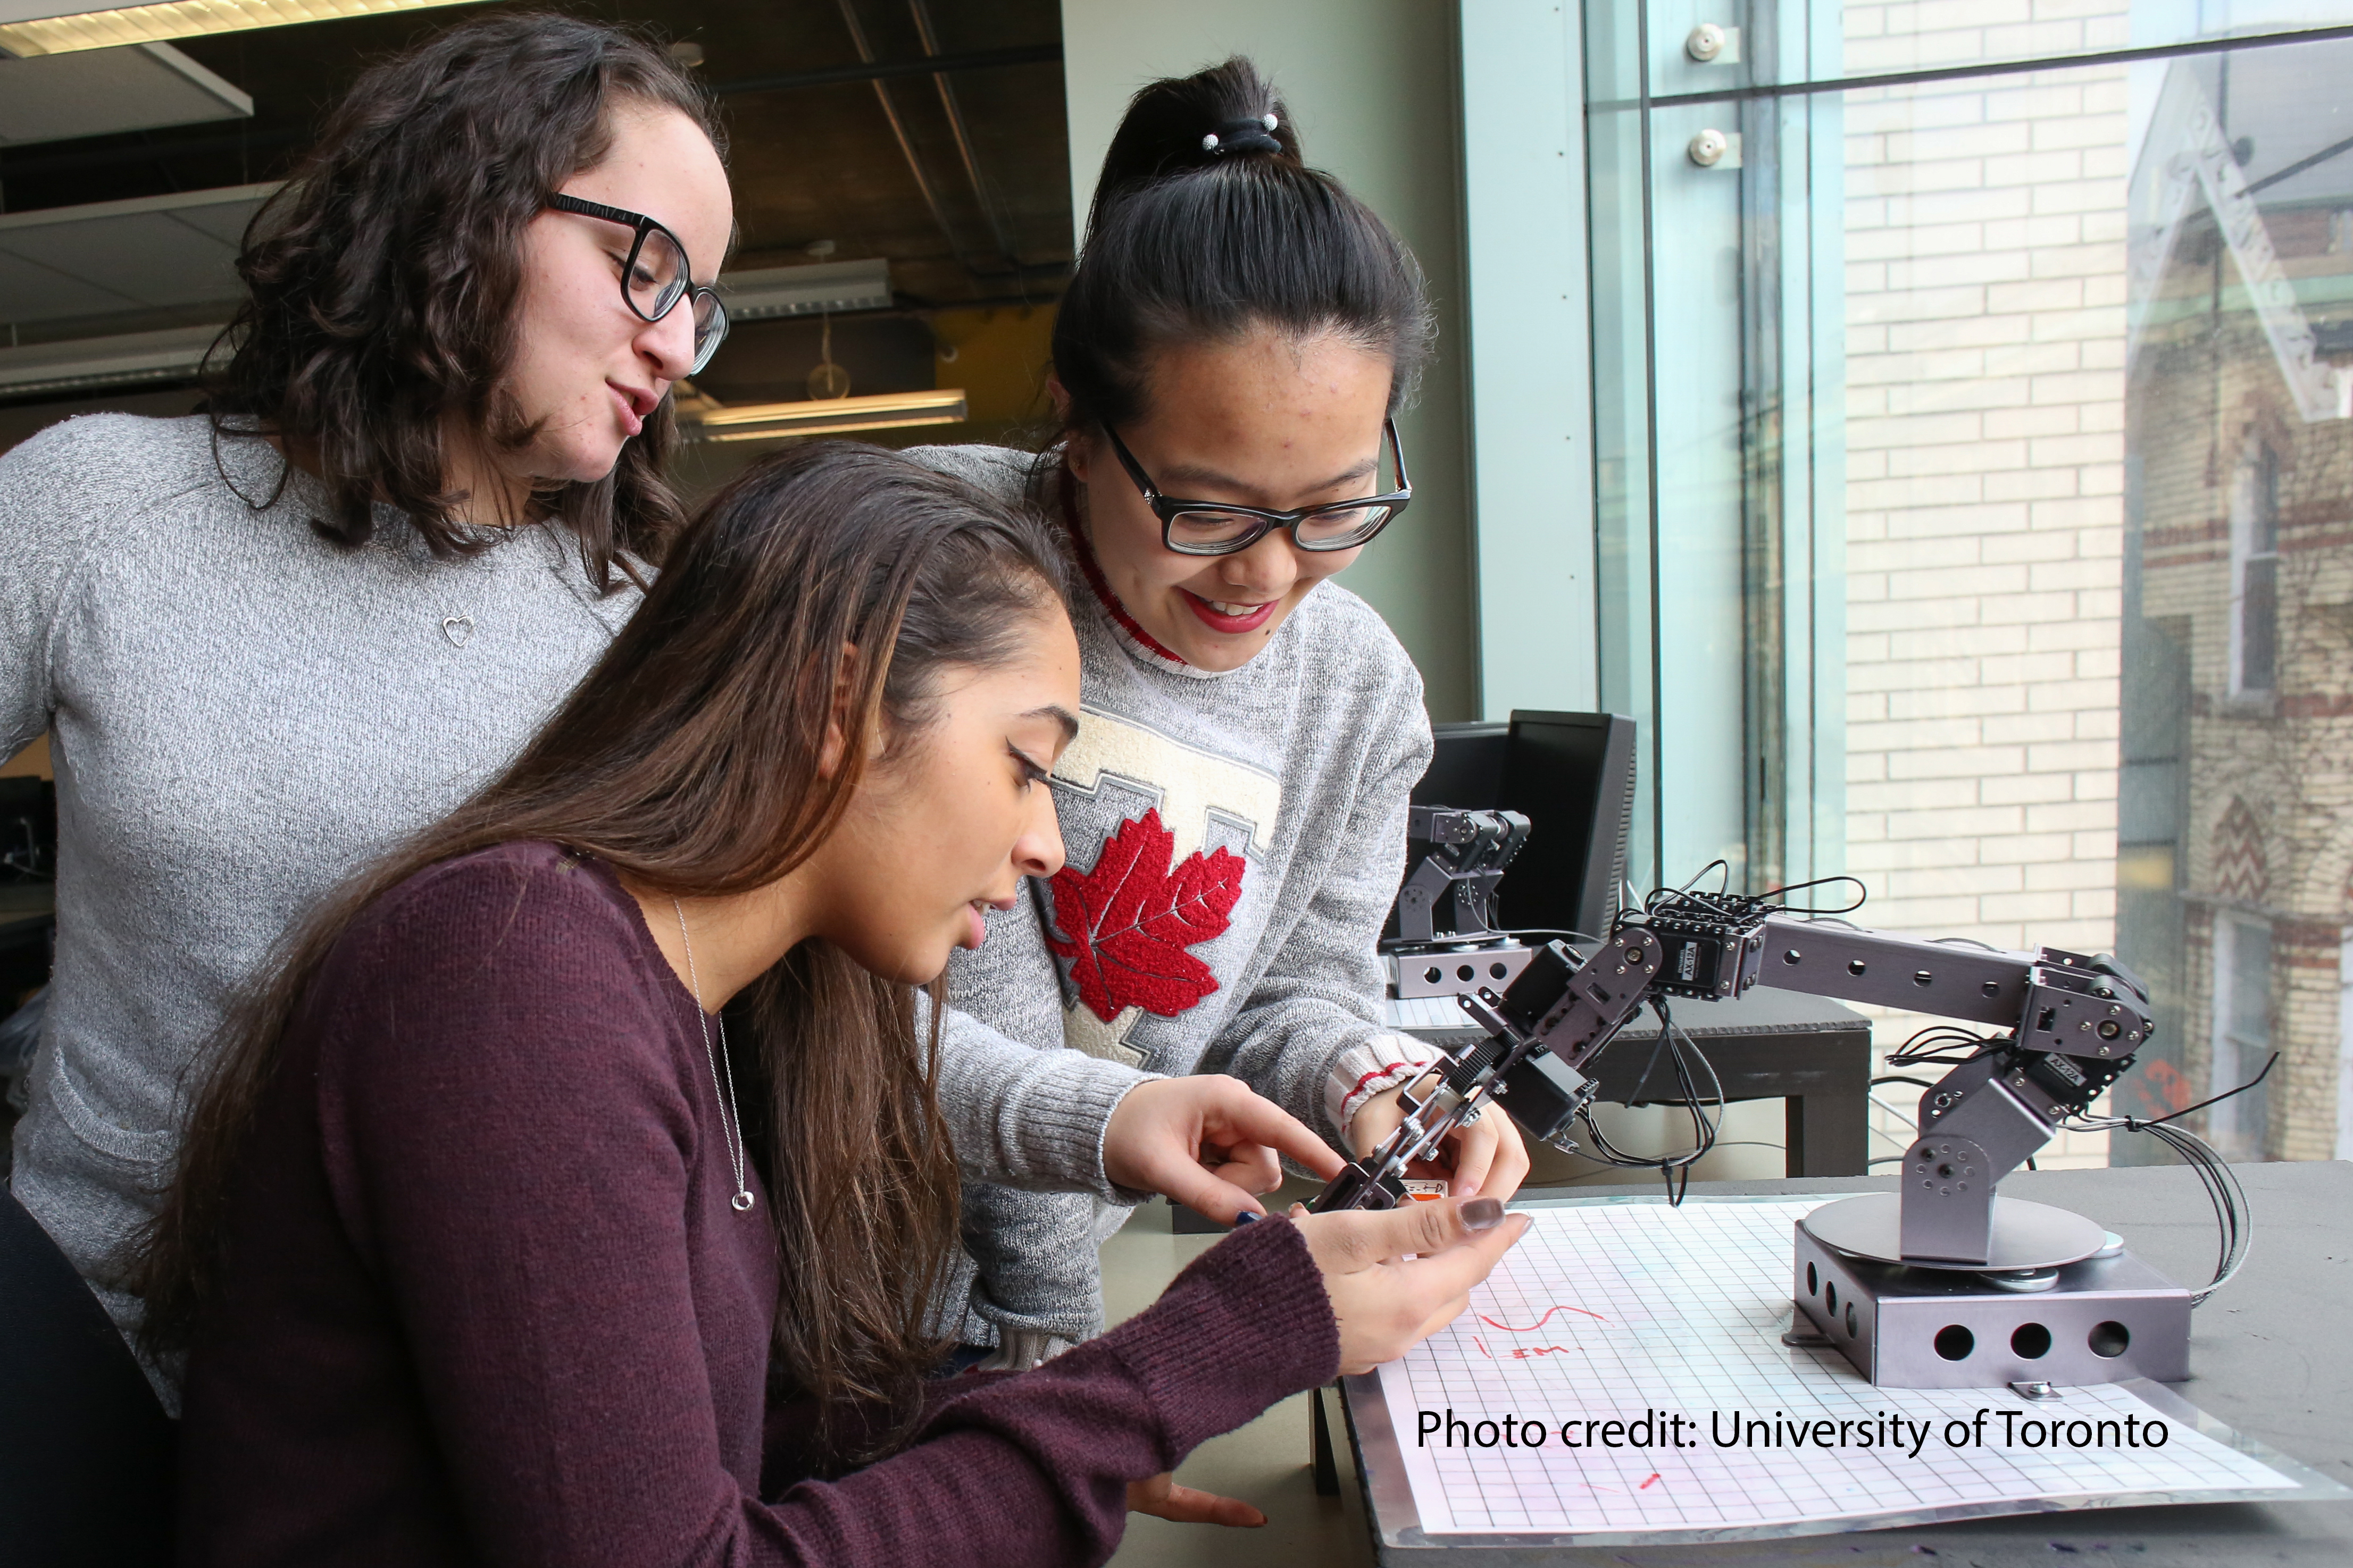 In the fall of 2016, the proportion of women in U of T's Faculty of Applied Science & Engineering's first-year class was 40.1 per cent, the highest figure among Ontario engineering programs at that time, according to statistics from the Council of Engineering Deans of Ontario. Pictured (left to right): Michela Trozzo, electrical & computer engineering student; Christian Pavlidis, civil engineering student; and Elisha Lu, electrical and computer engineering student work with a robotic arm.